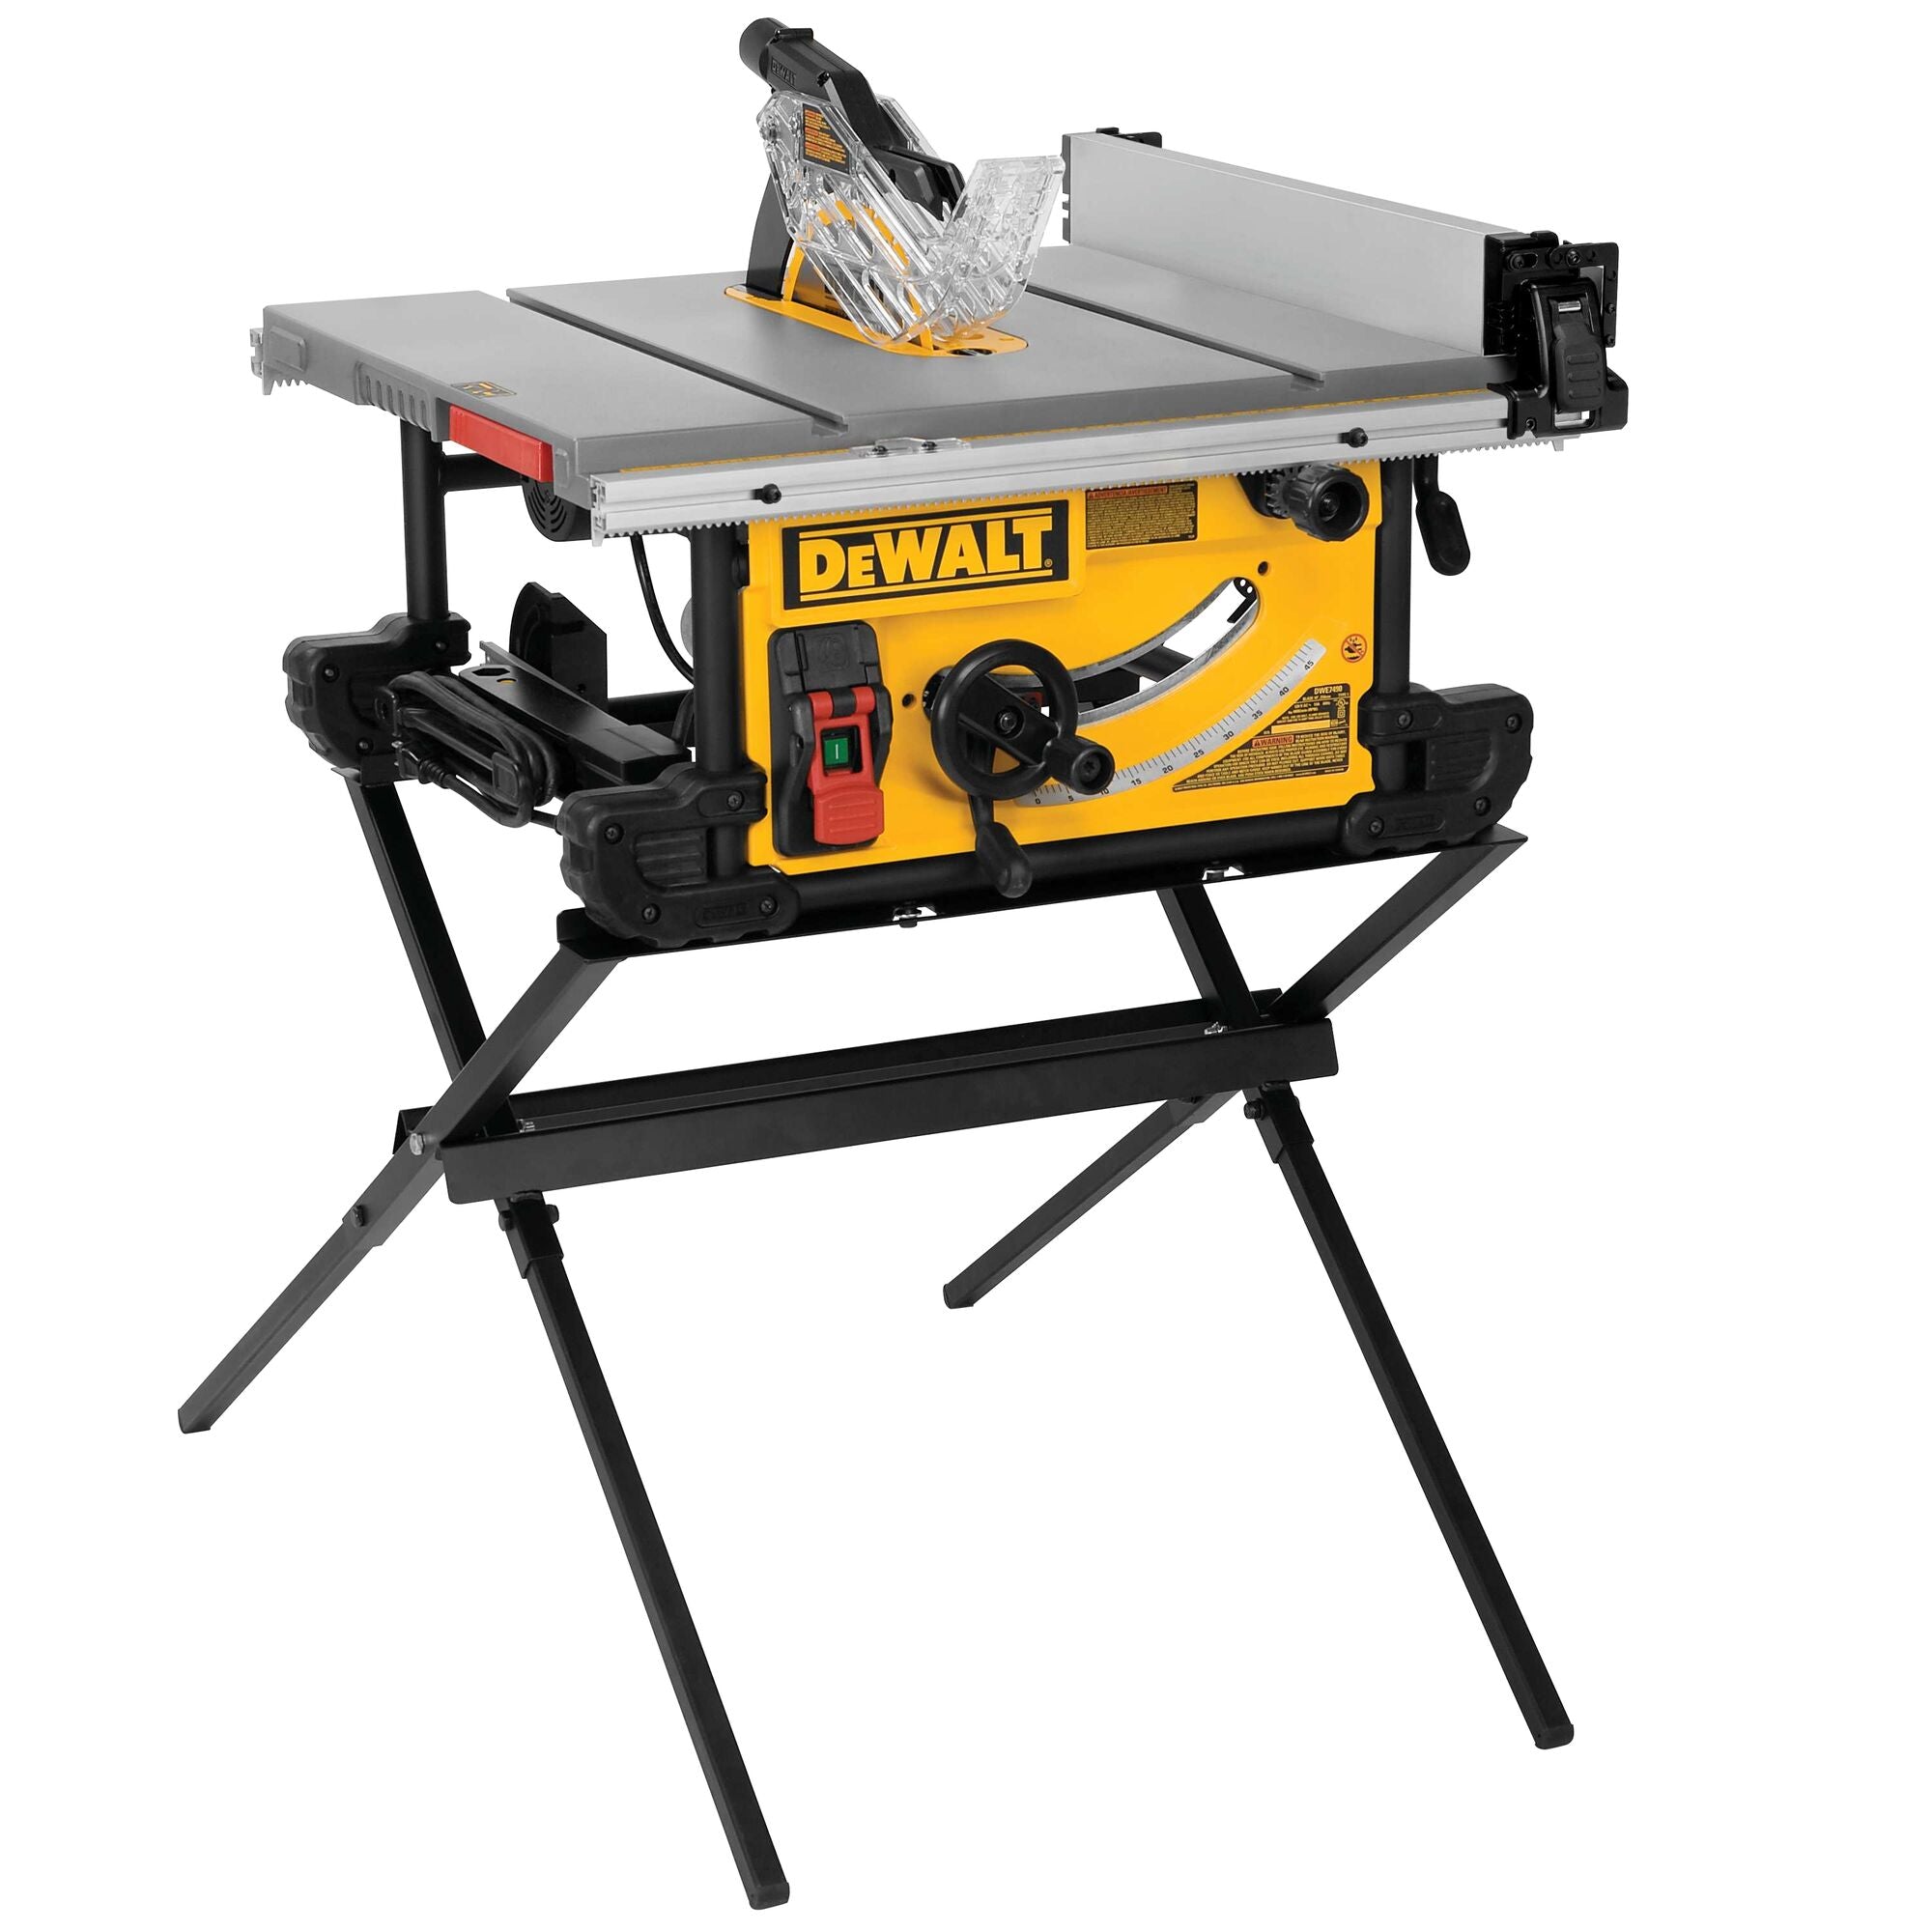 10" Table Saw Jobsite Table Saw 32-1/2" Rip Capacity with Stand